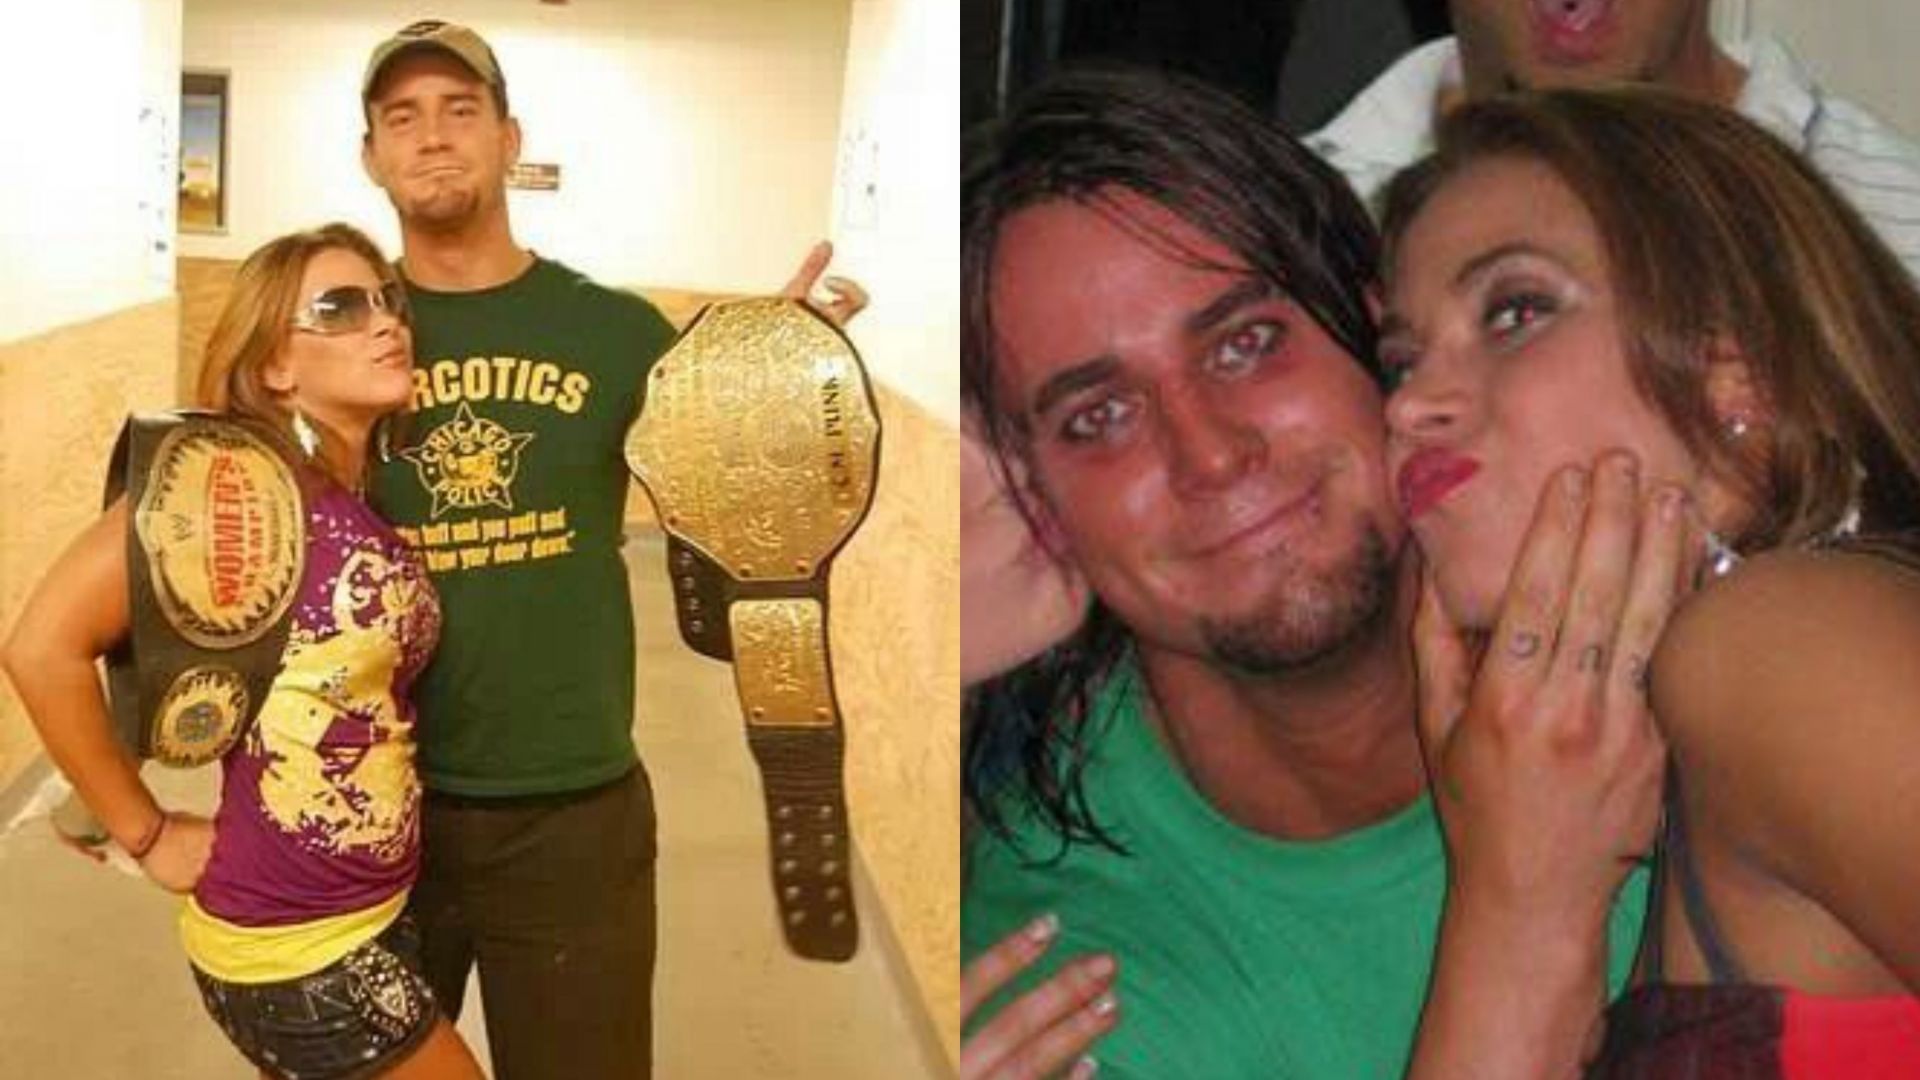 Rumors suggested that CM Punk and Mickie James dated in 2003